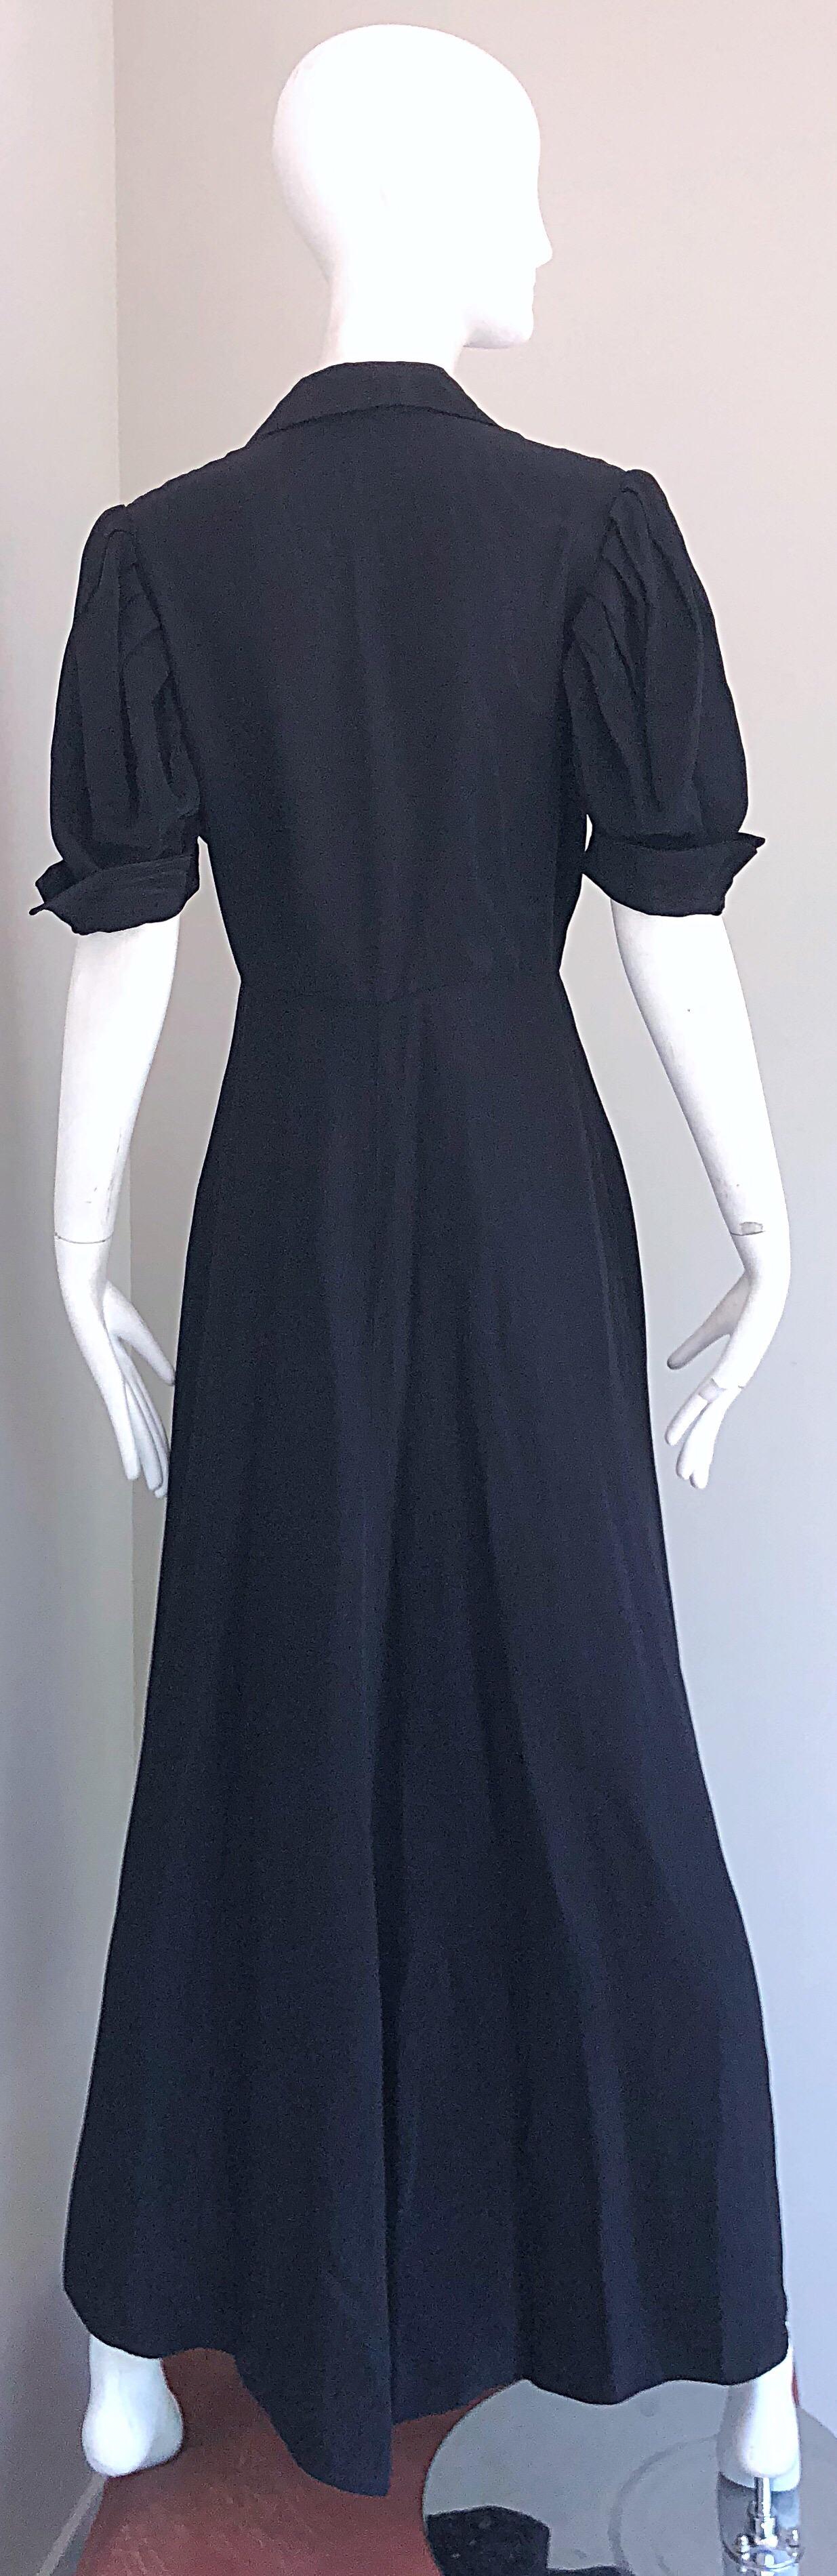 1940s Demi Couture Black Silk Moire Short Sleeve Vintage 40s Evening Gown Dress In Excellent Condition For Sale In San Diego, CA